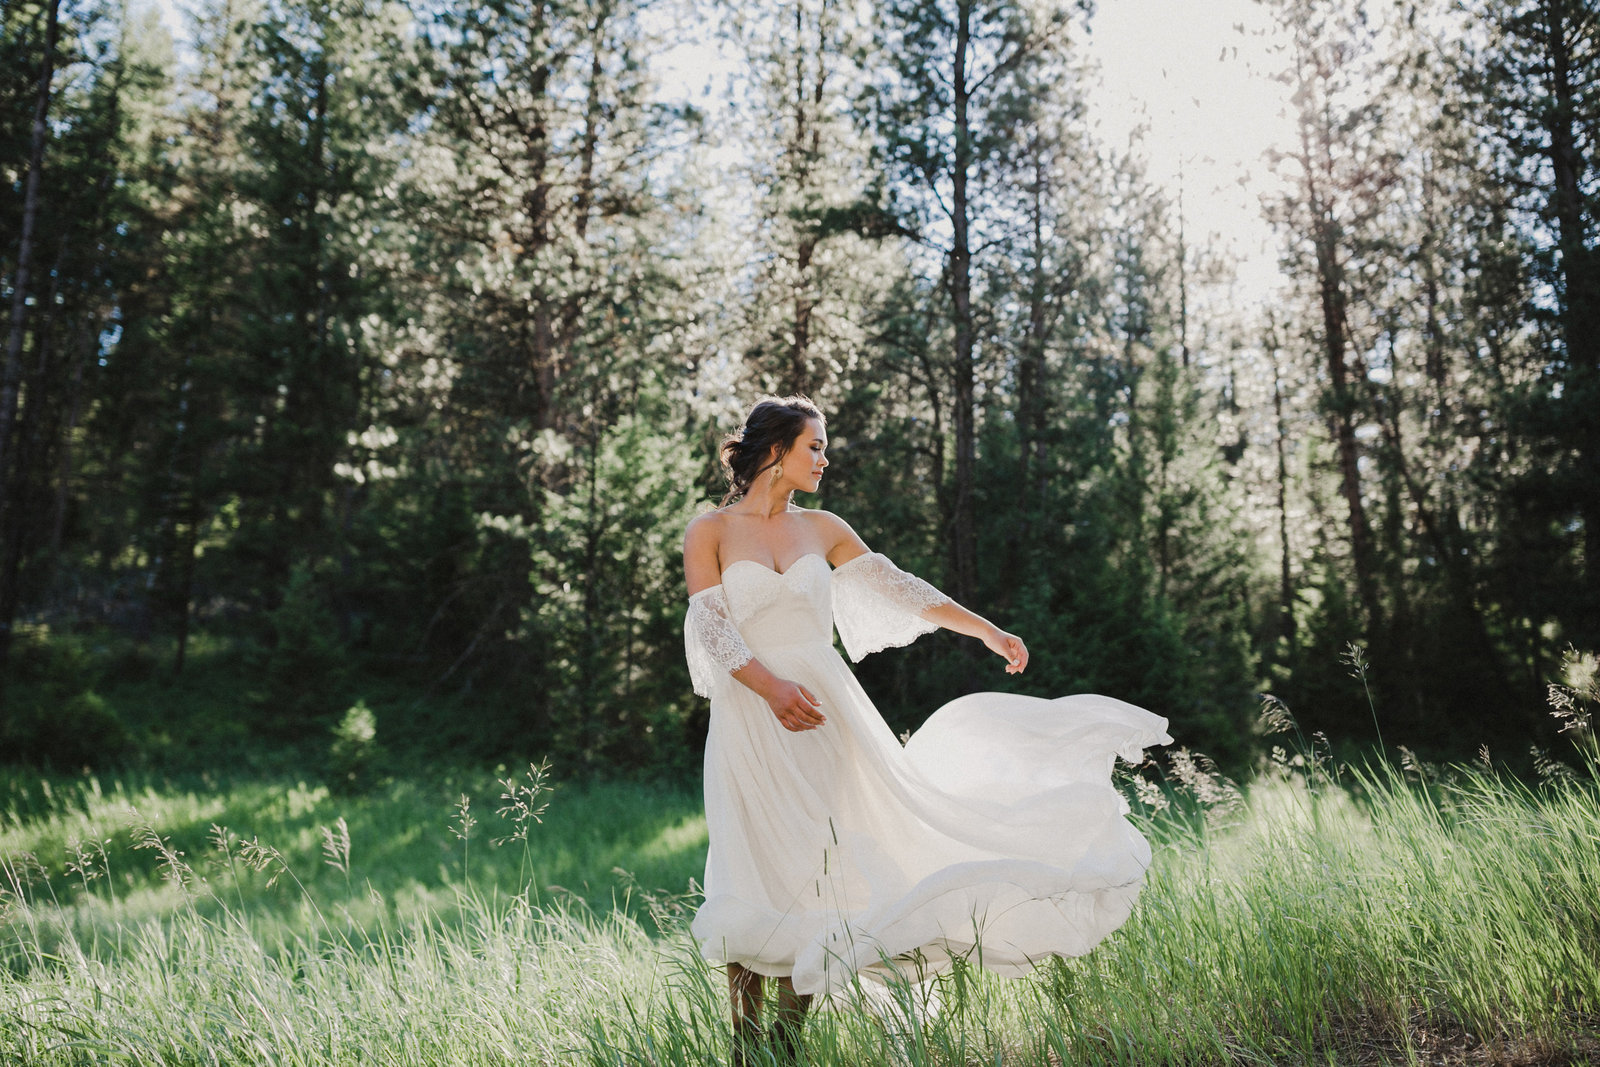 Boho inspired styled wedding shoot, photographed in Montana by Sweetwater.